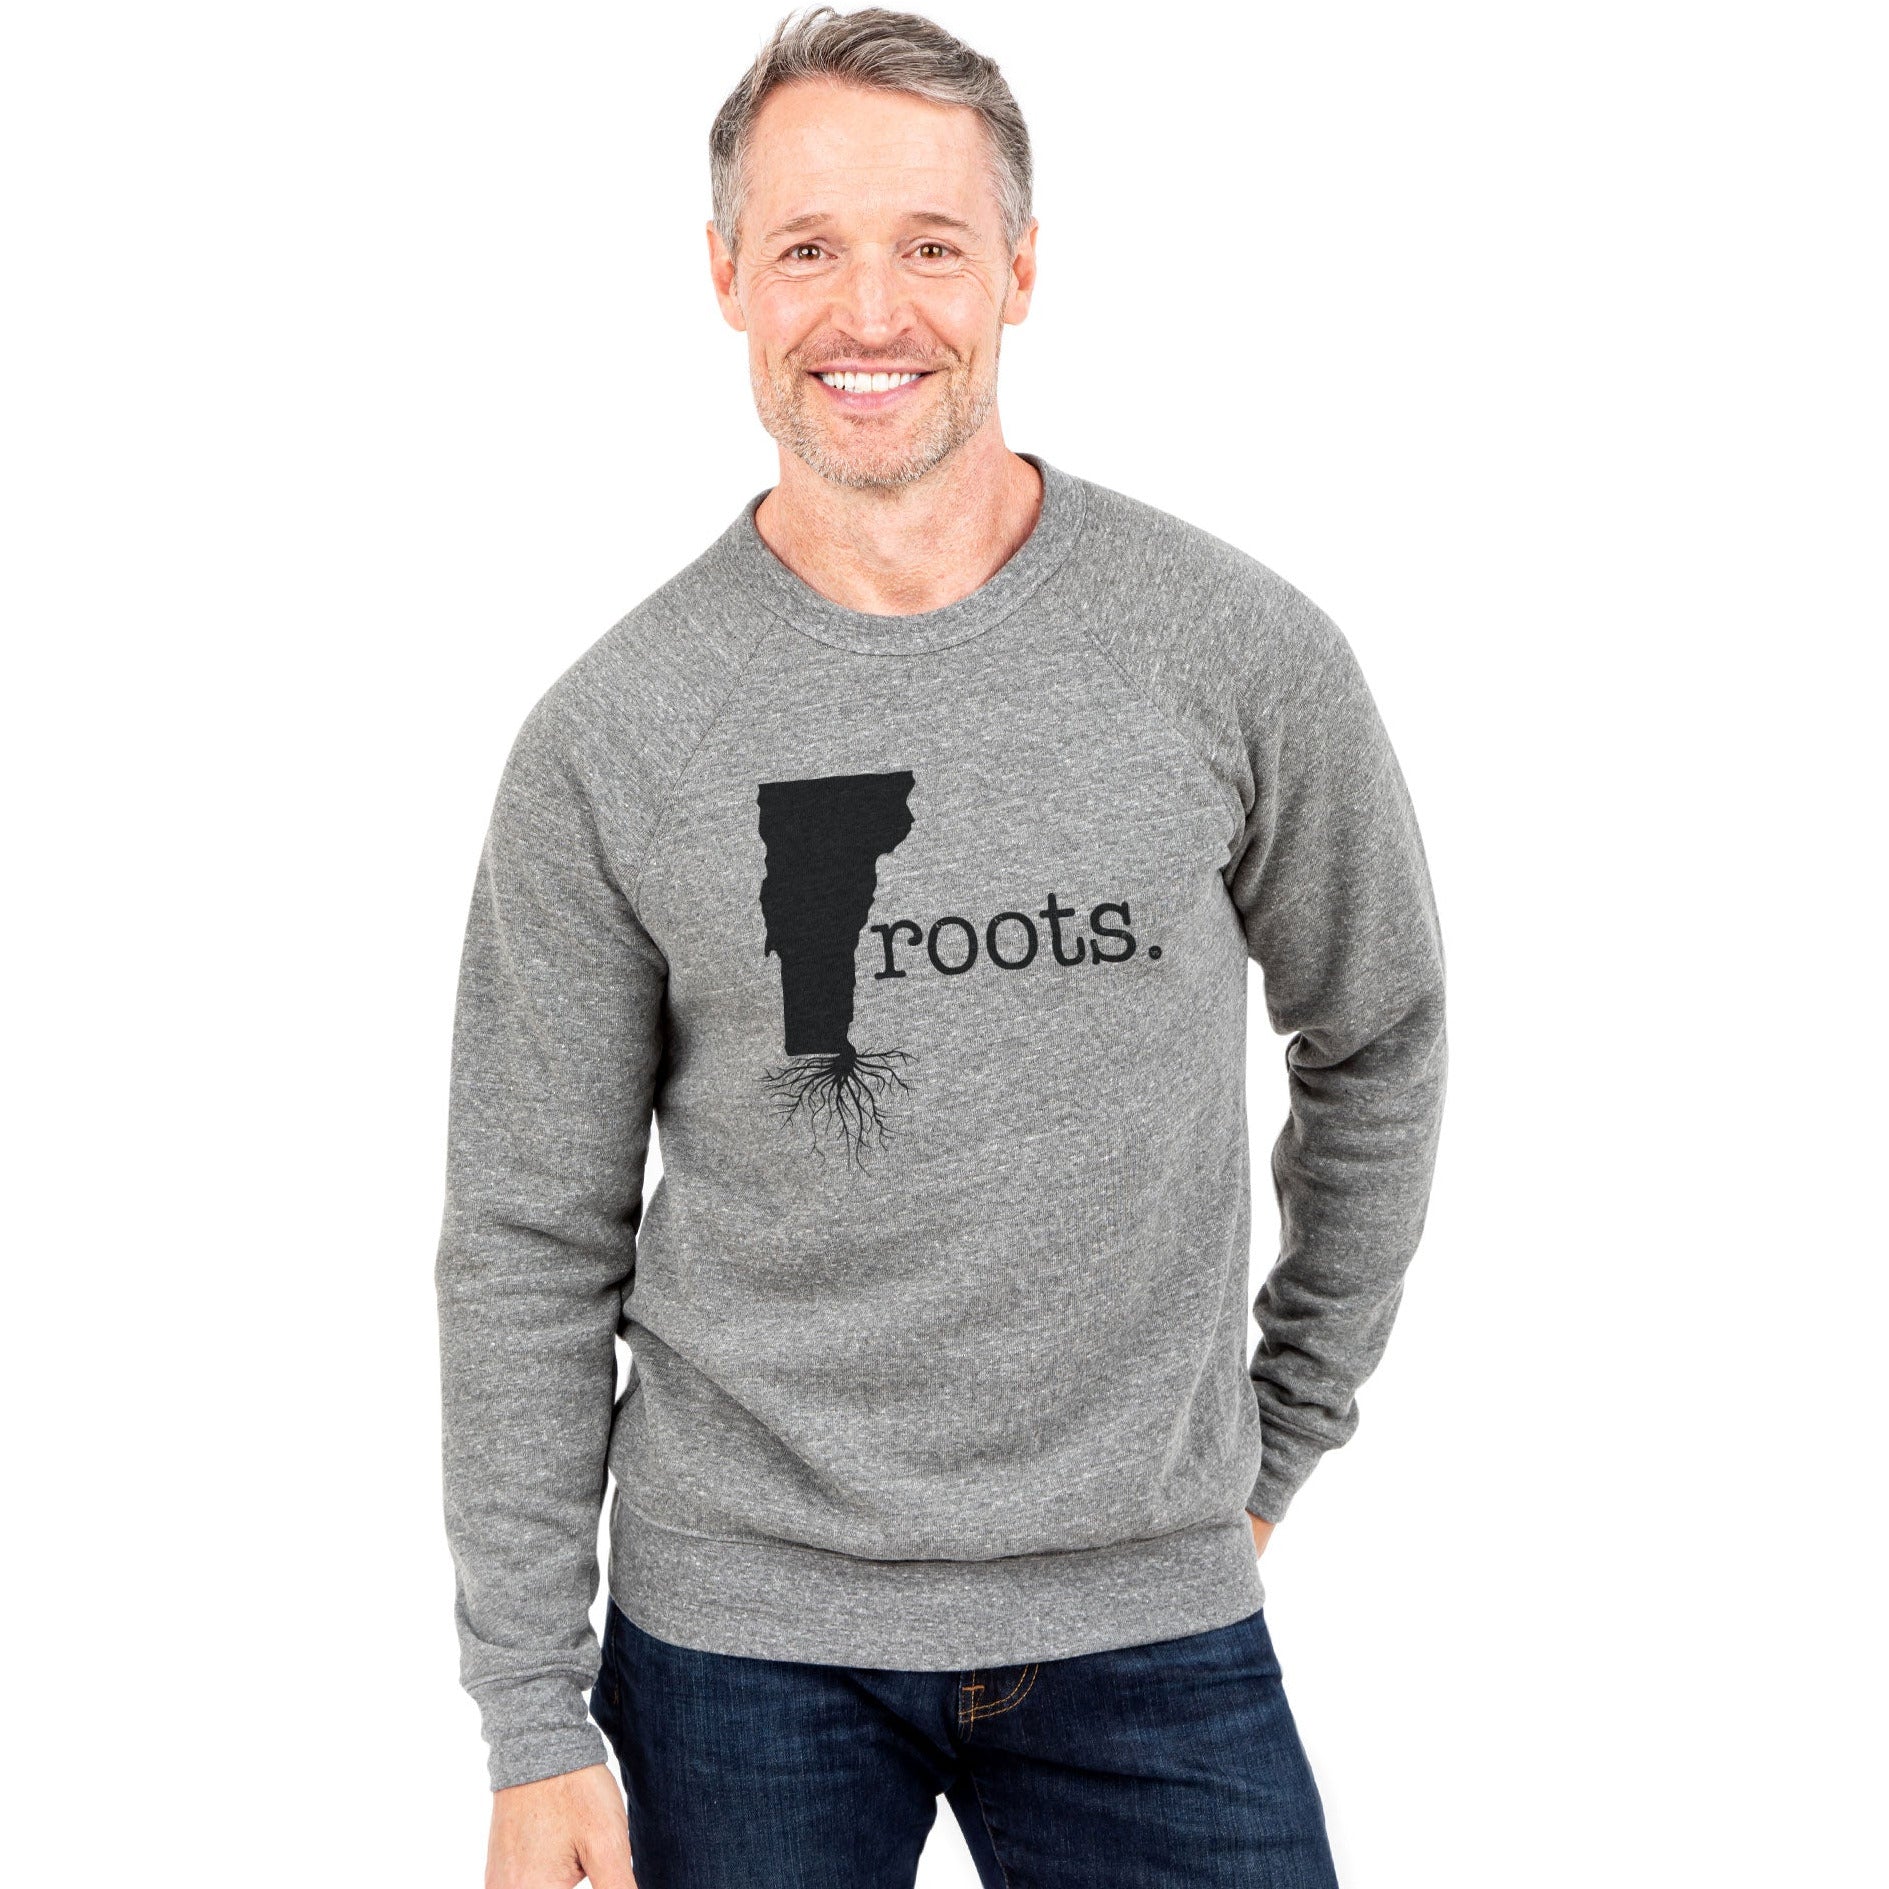 Roots State Vermont - Stories You Can Wear